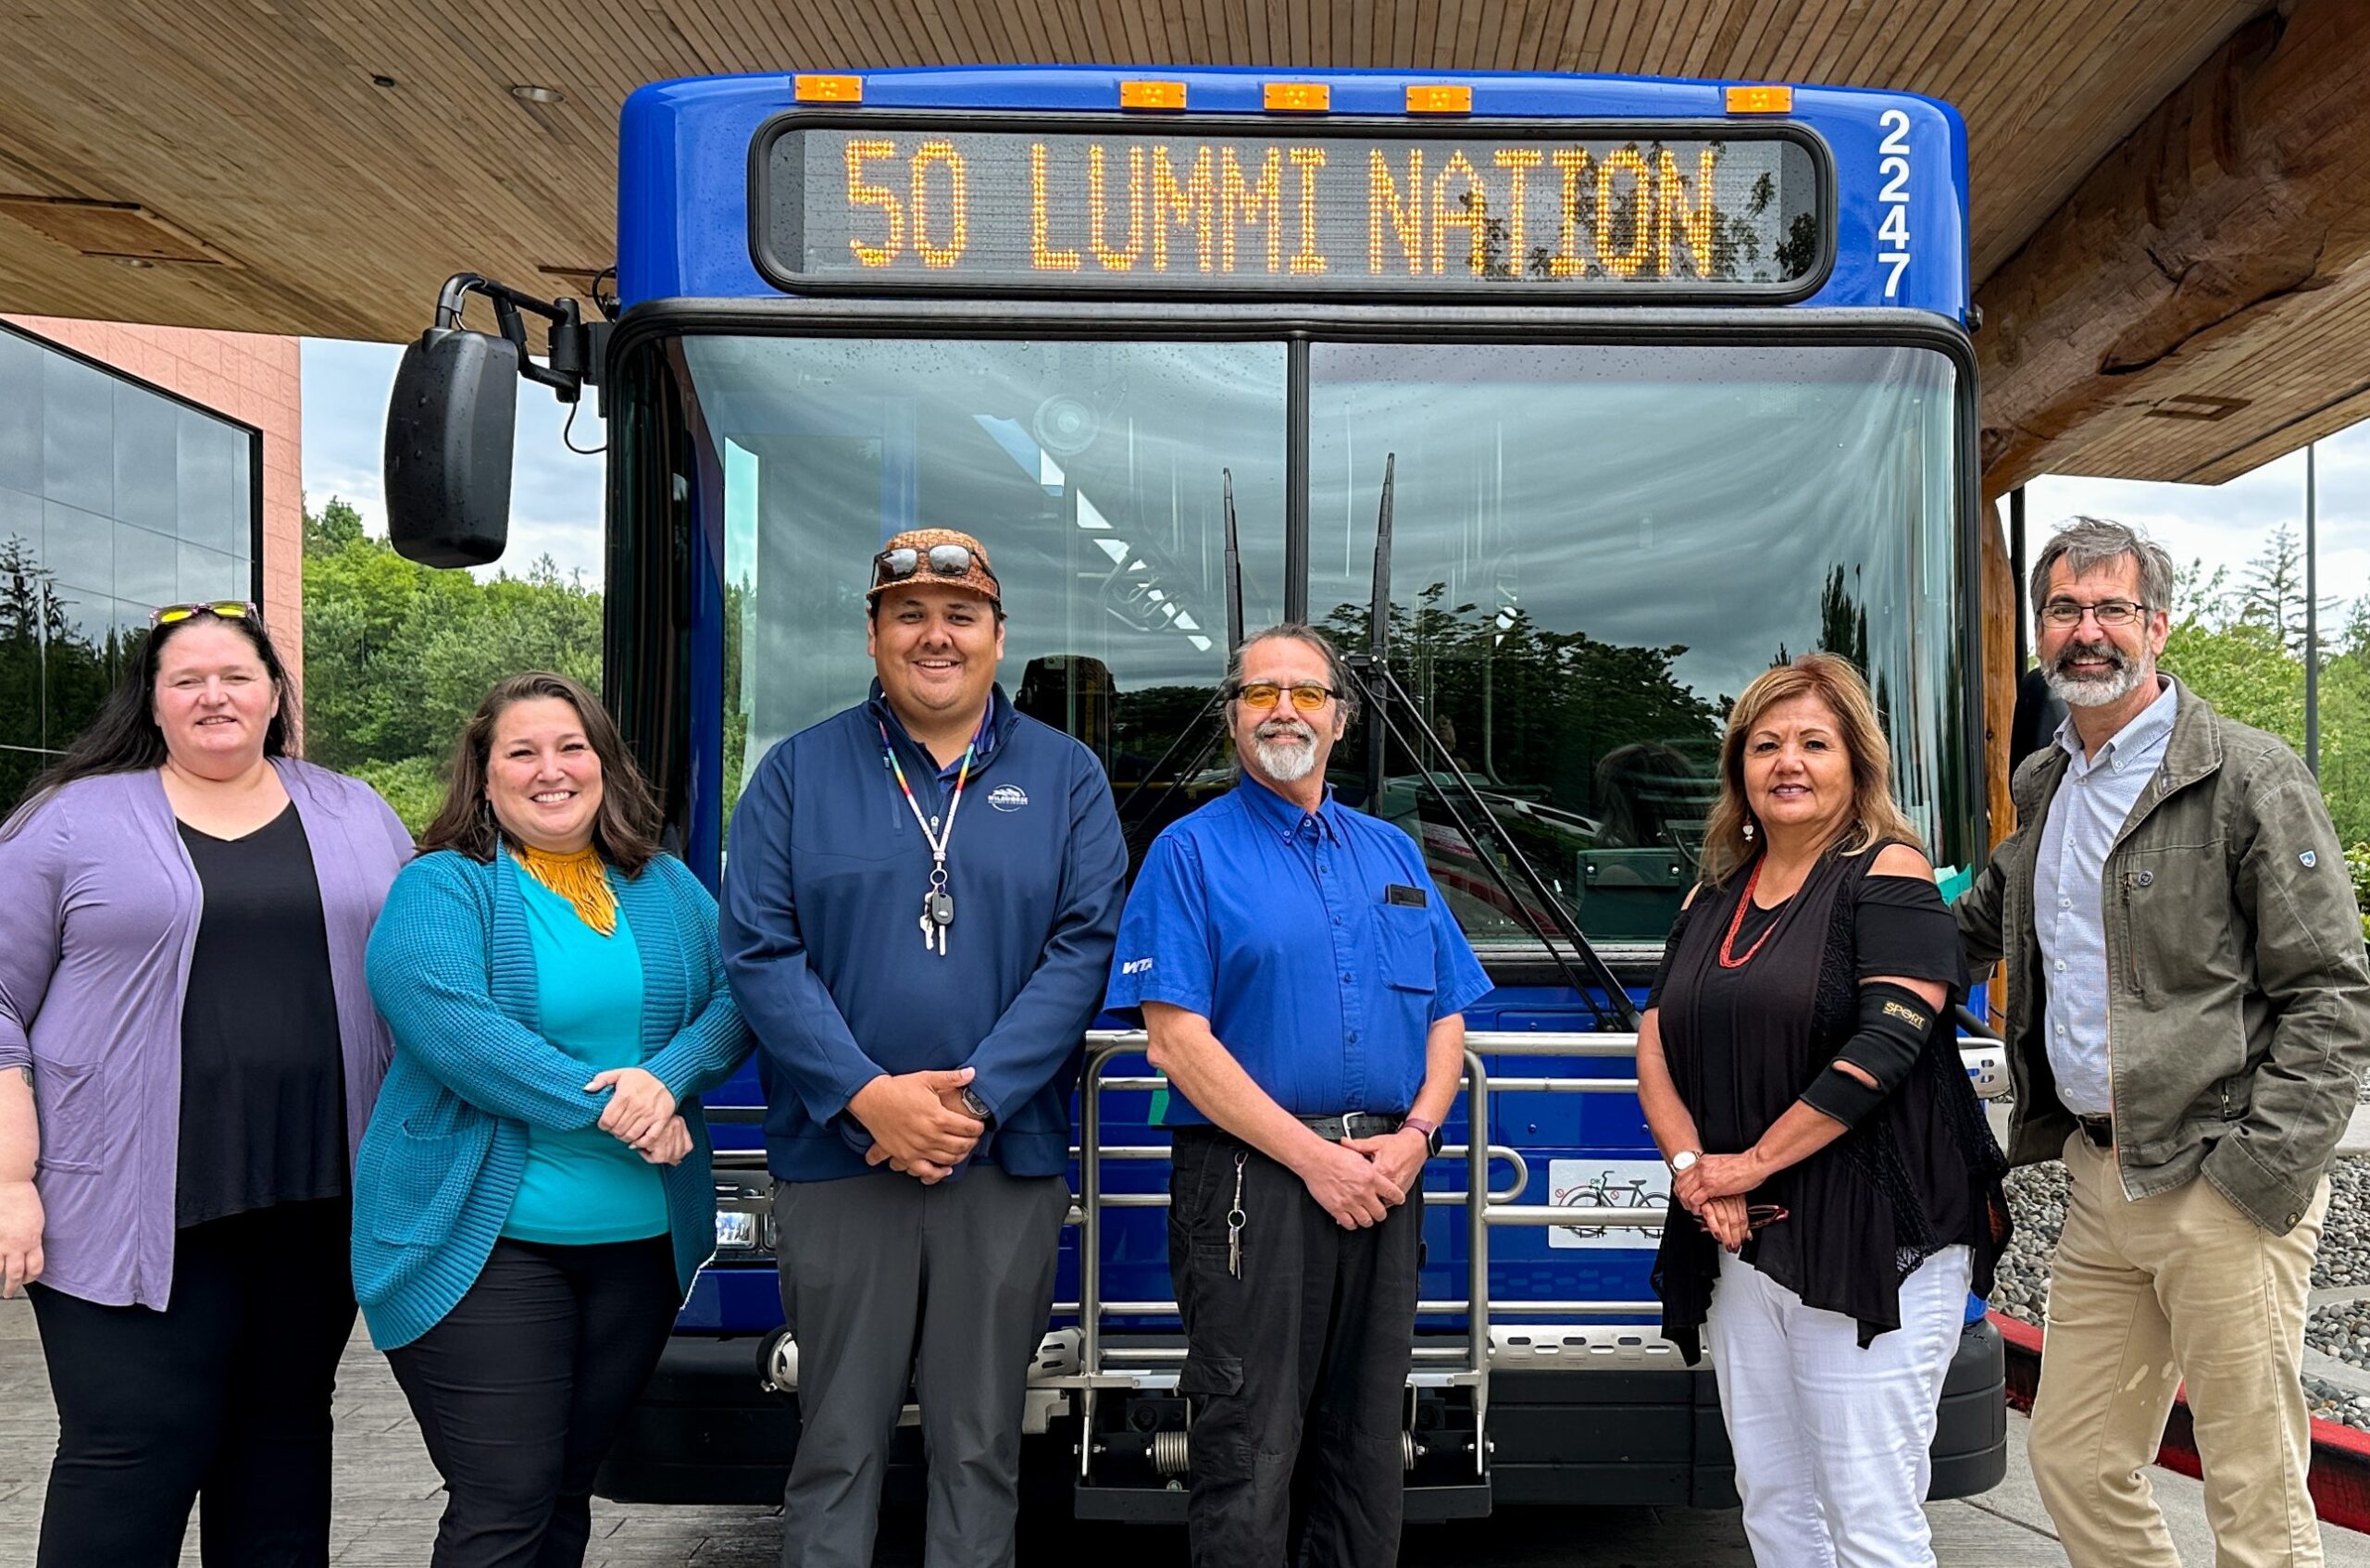 Photo of 6 people standing in front of a bus. the bus says "Route 50 Lummi Nation" and the people are representatives from Whatcom Transportation Authority and Lummi Nation leadership